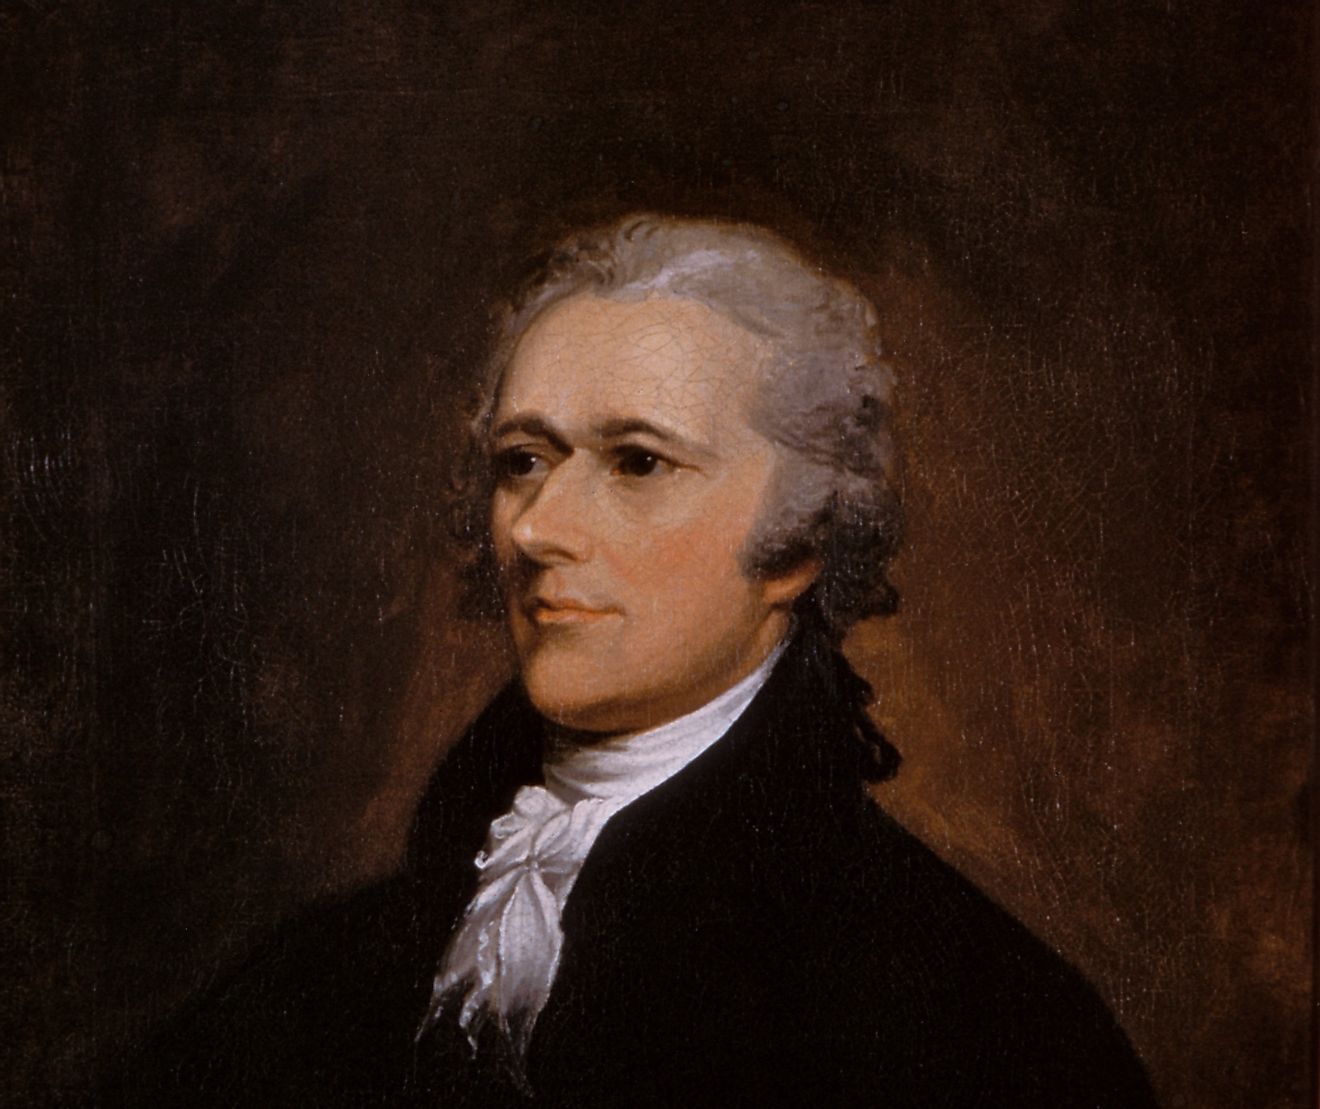 Portrait of Alexander Hamilton, one of the authors of Federalist Papers. Image credit: John Trumbull/Public domain